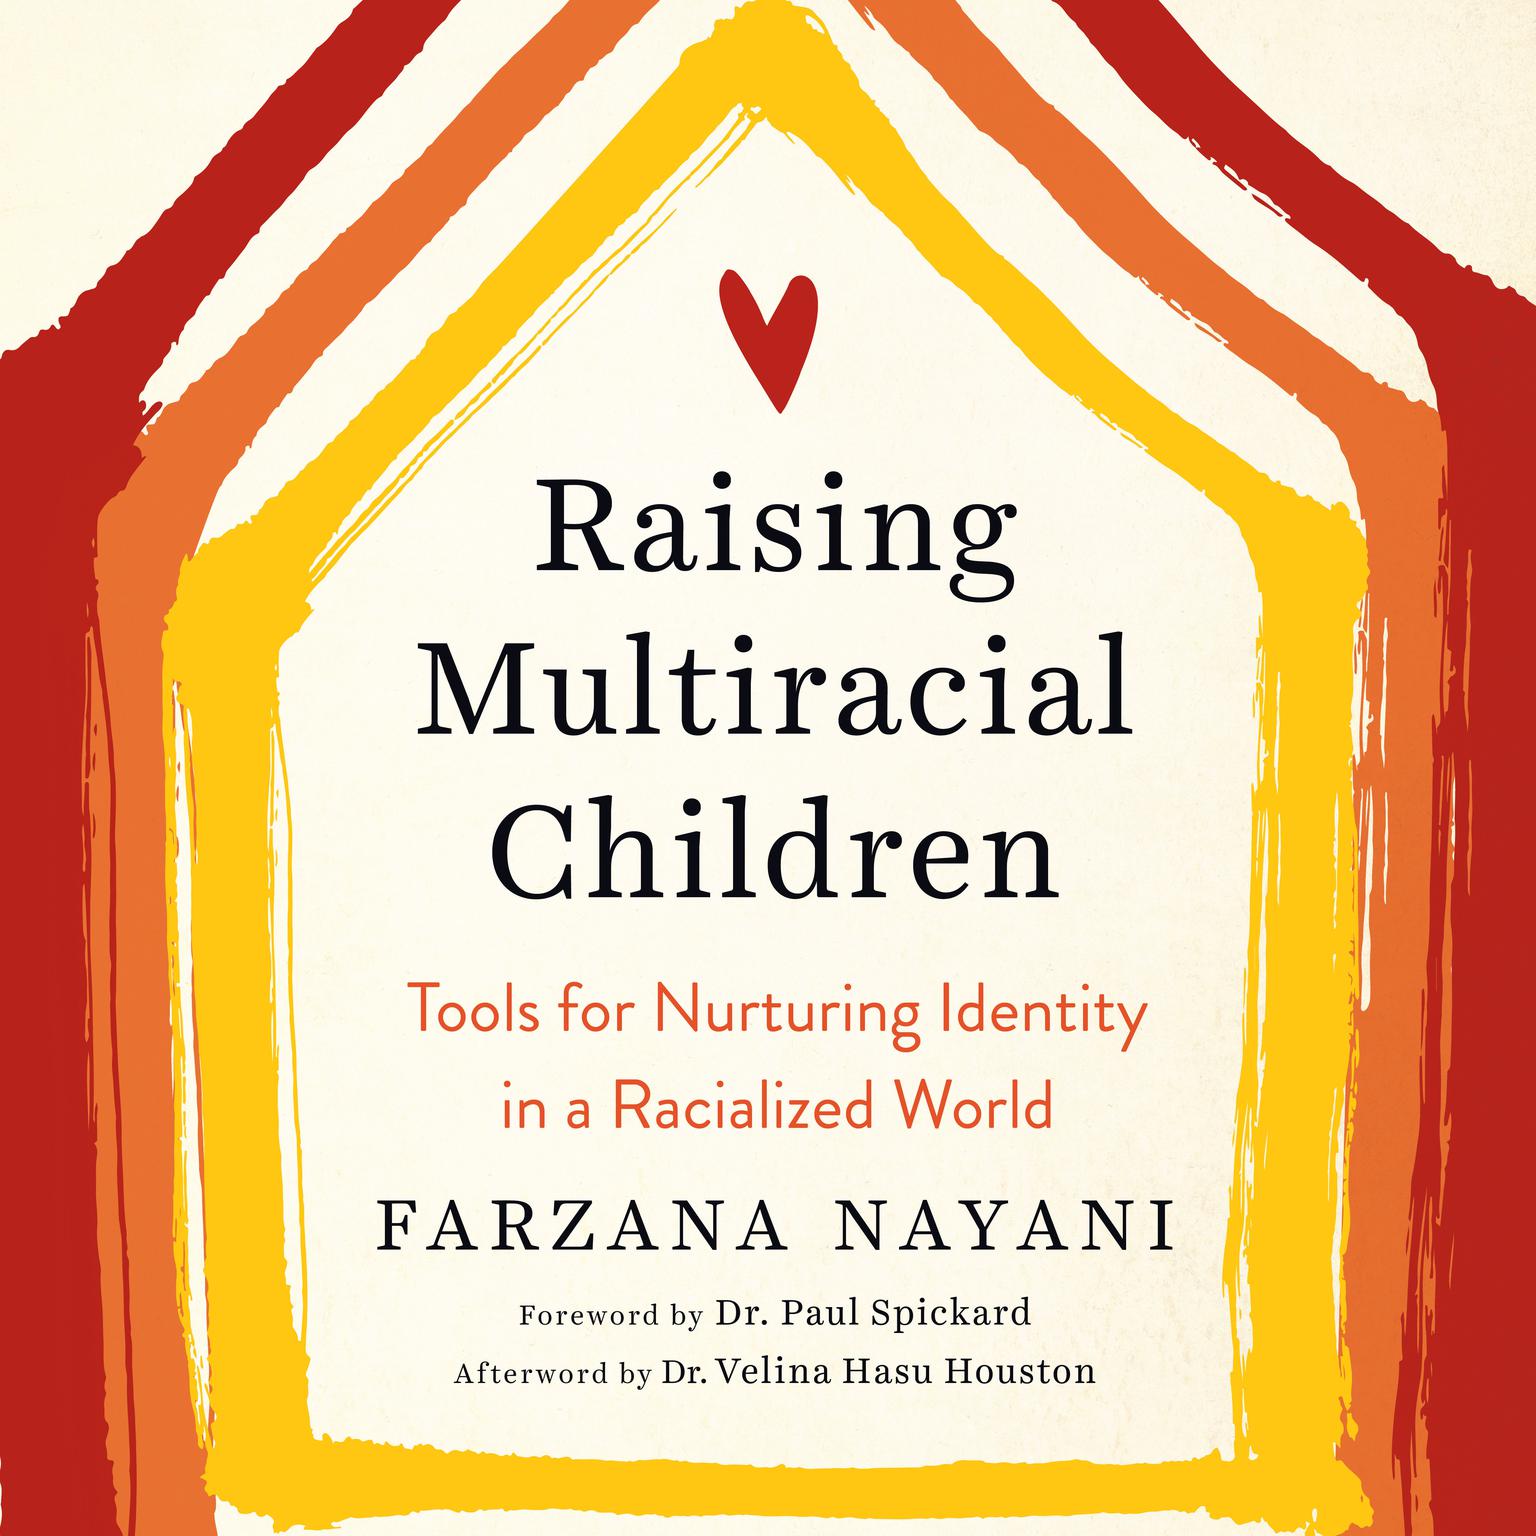 Raising Multiracial Children: Tools for Nurturing Identity in a Racialized World Audiobook, by Farzana Nayani